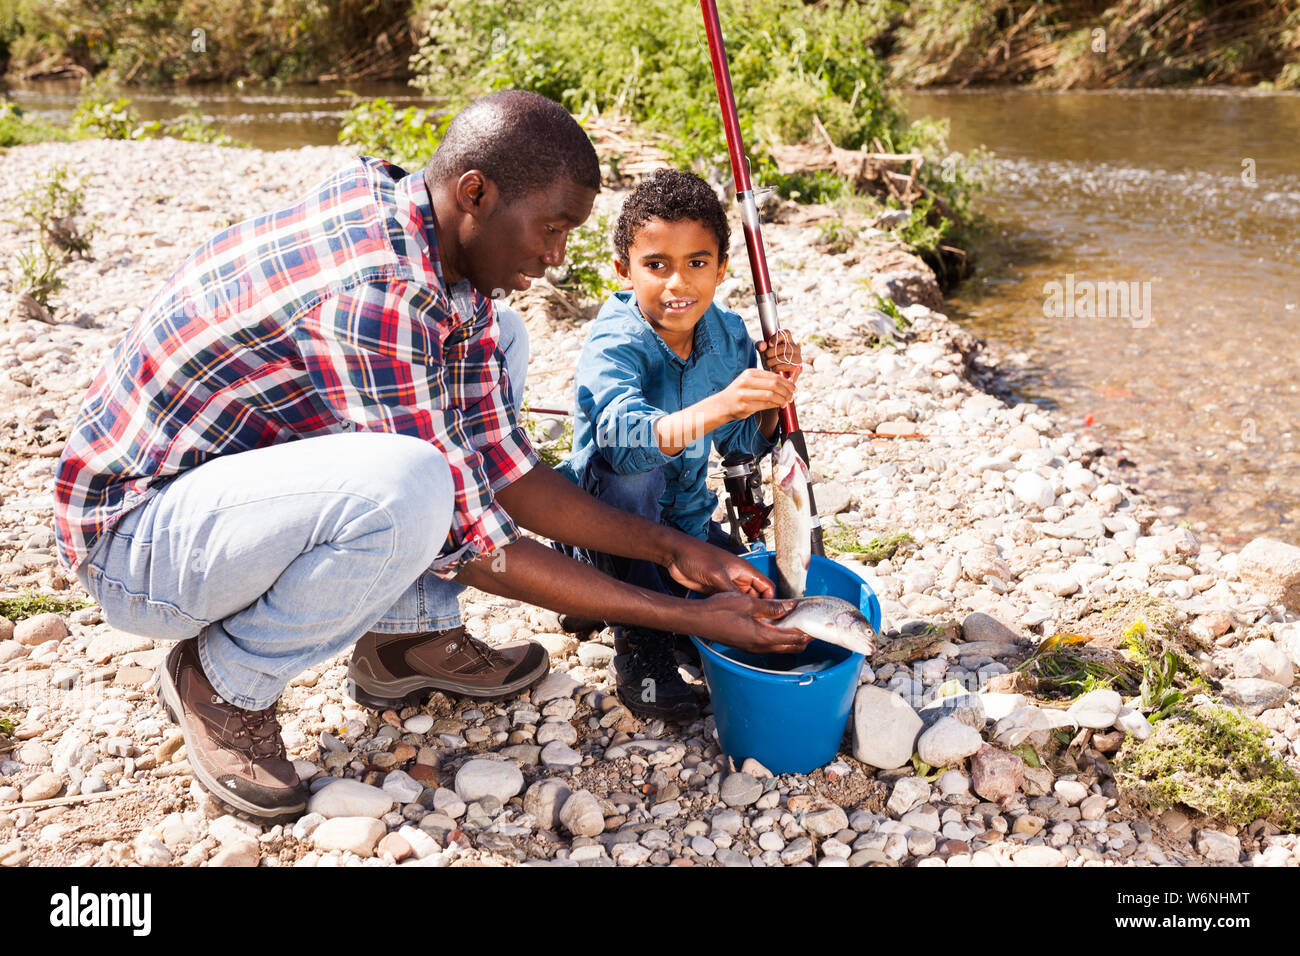 Portrait of enthusiastic little African boy and his father holding fishing rod with fish on hook Stock Photo